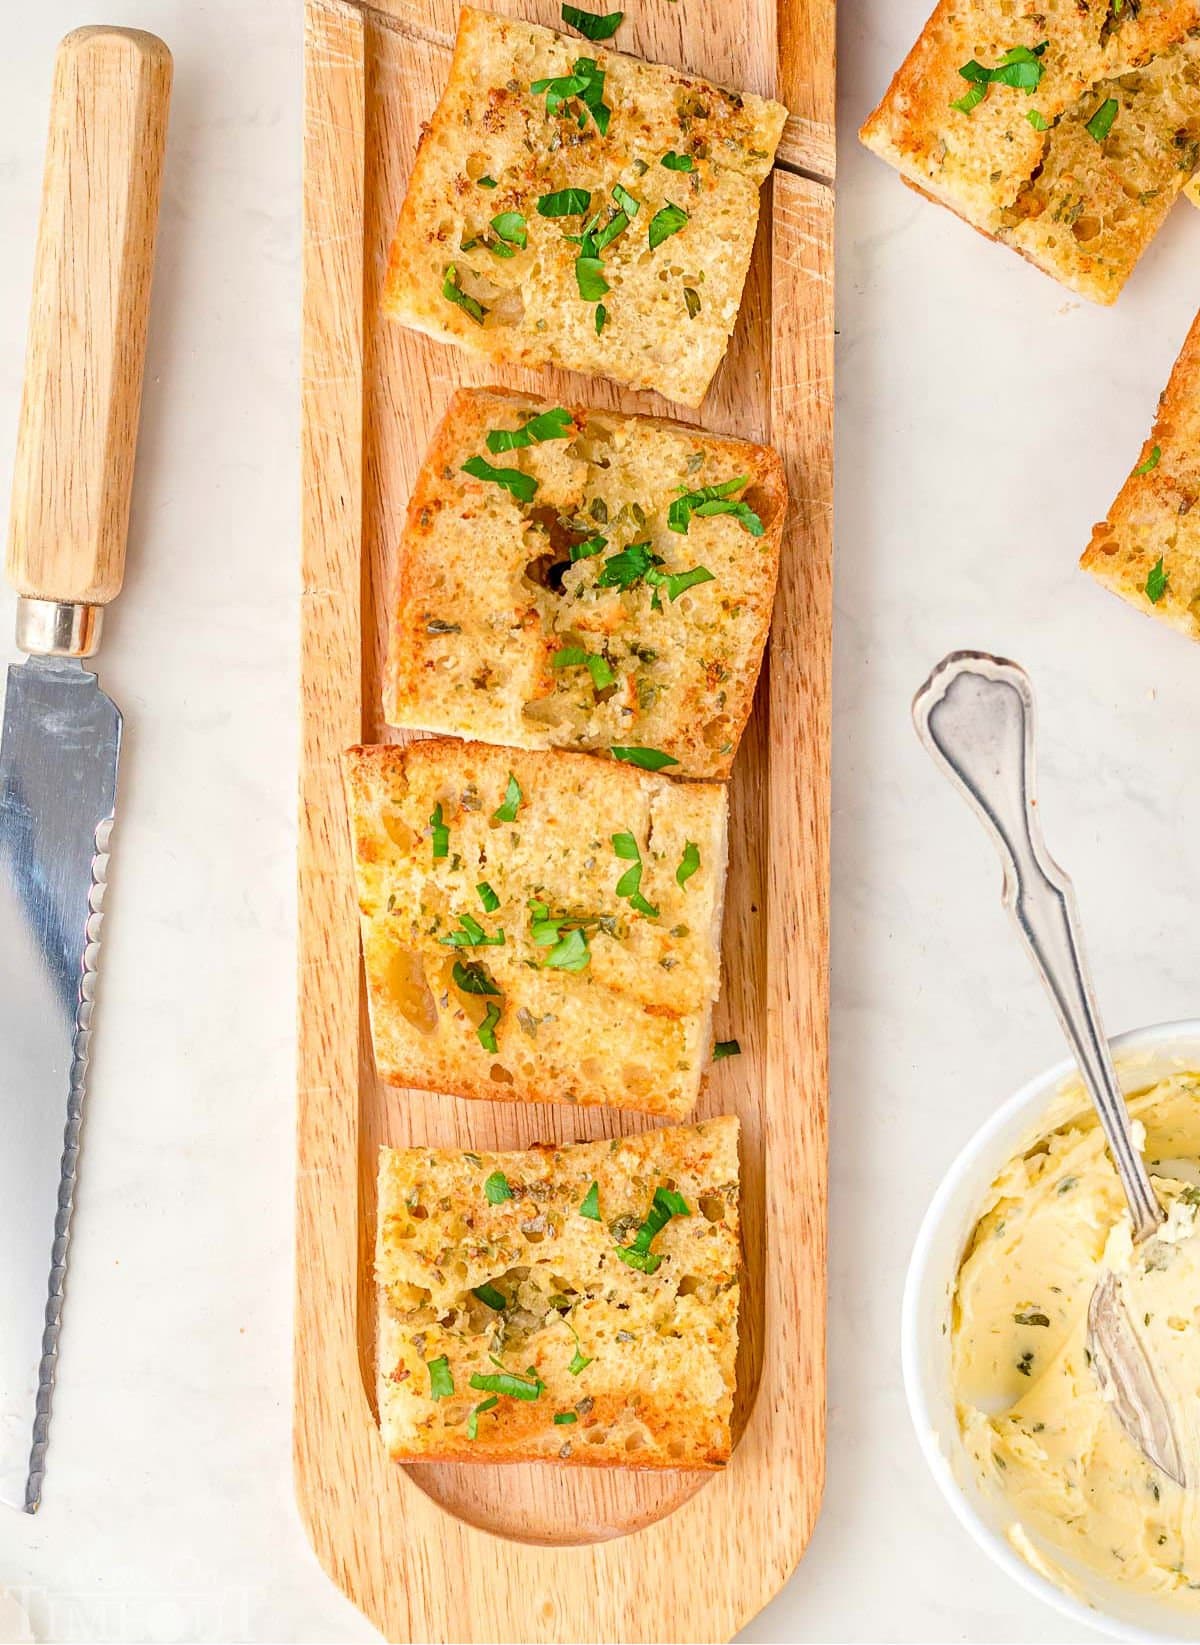 wood board with garlic bread cut into pieces on it. bowl of garlic butter off to the side with more pieces of garlic bread and a knife on the other side.